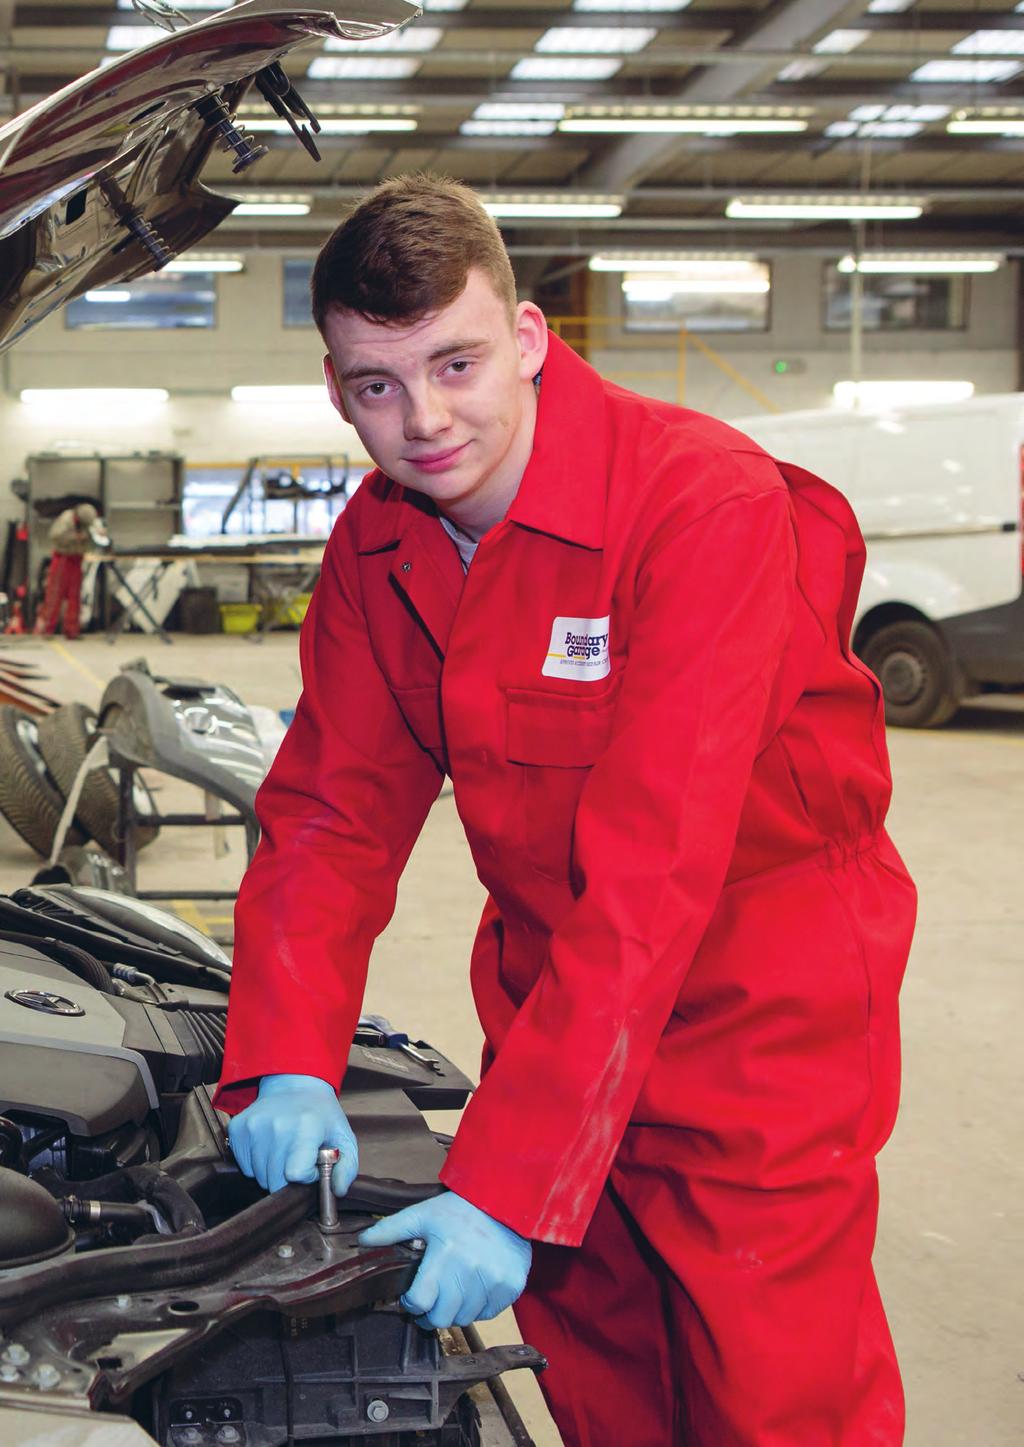 With an Apprenticeship you get to learn from the best skilled technicians in the workplace and experienced tutors at College.